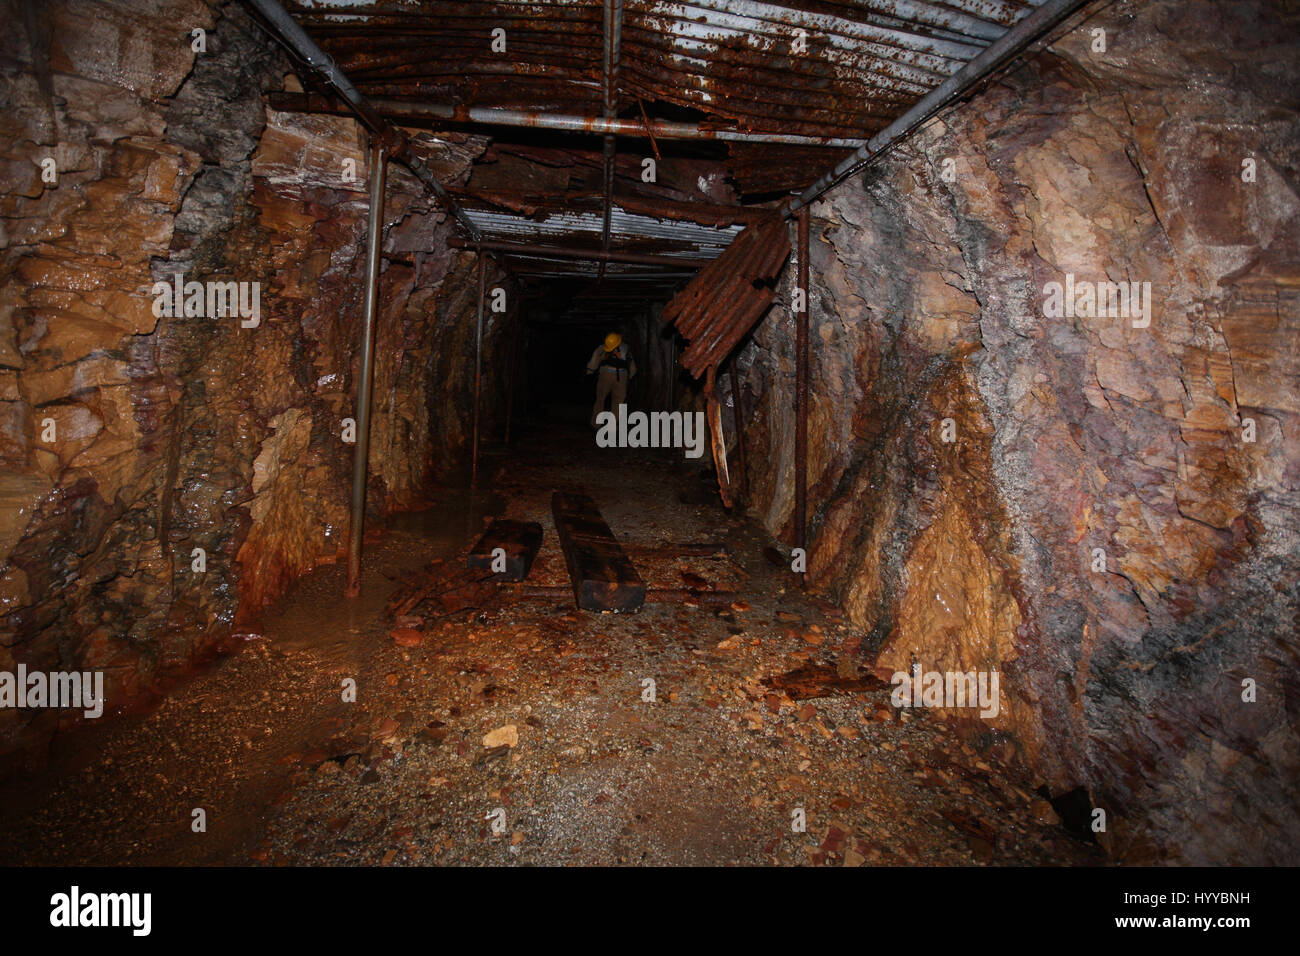 CALLINGTON, CORNWALL, UK: EERIE images reveal the Cornish mining tunnel that was once used to test explosives and research the potential impact of nuclear tests during the Cold War under the code name Operation Orpheus. The haunting pictures show inside the 2,180-foot tunnel where rusting sleepers and collapsing structures remain. Other shots, look down into an adit (entrance) and show the unsuspecting exterior of the mine where a metal gate has been closed across. The spectacular images were taken at the Excelsior Tunnel, Kit Hill, Callington, Cornwall by editor, Nat W (46) from London. To ta Stock Photo